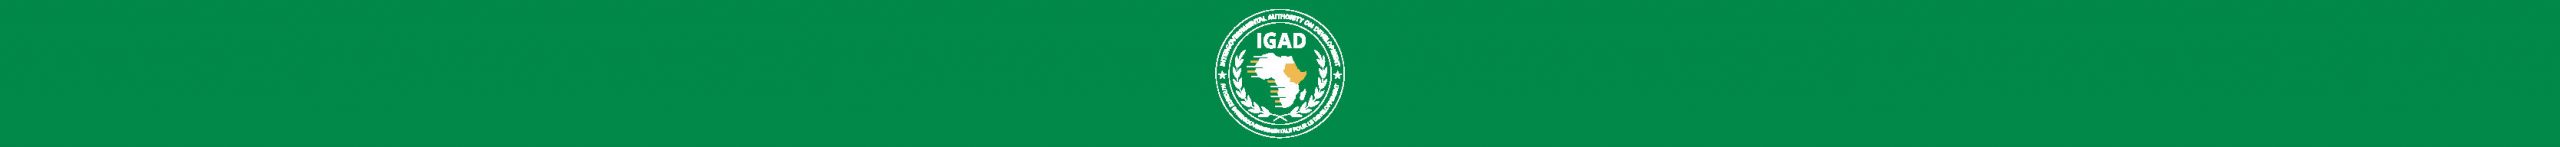 Launch and Planning of the Project ‘Improving Land Governance in the IGAD Region